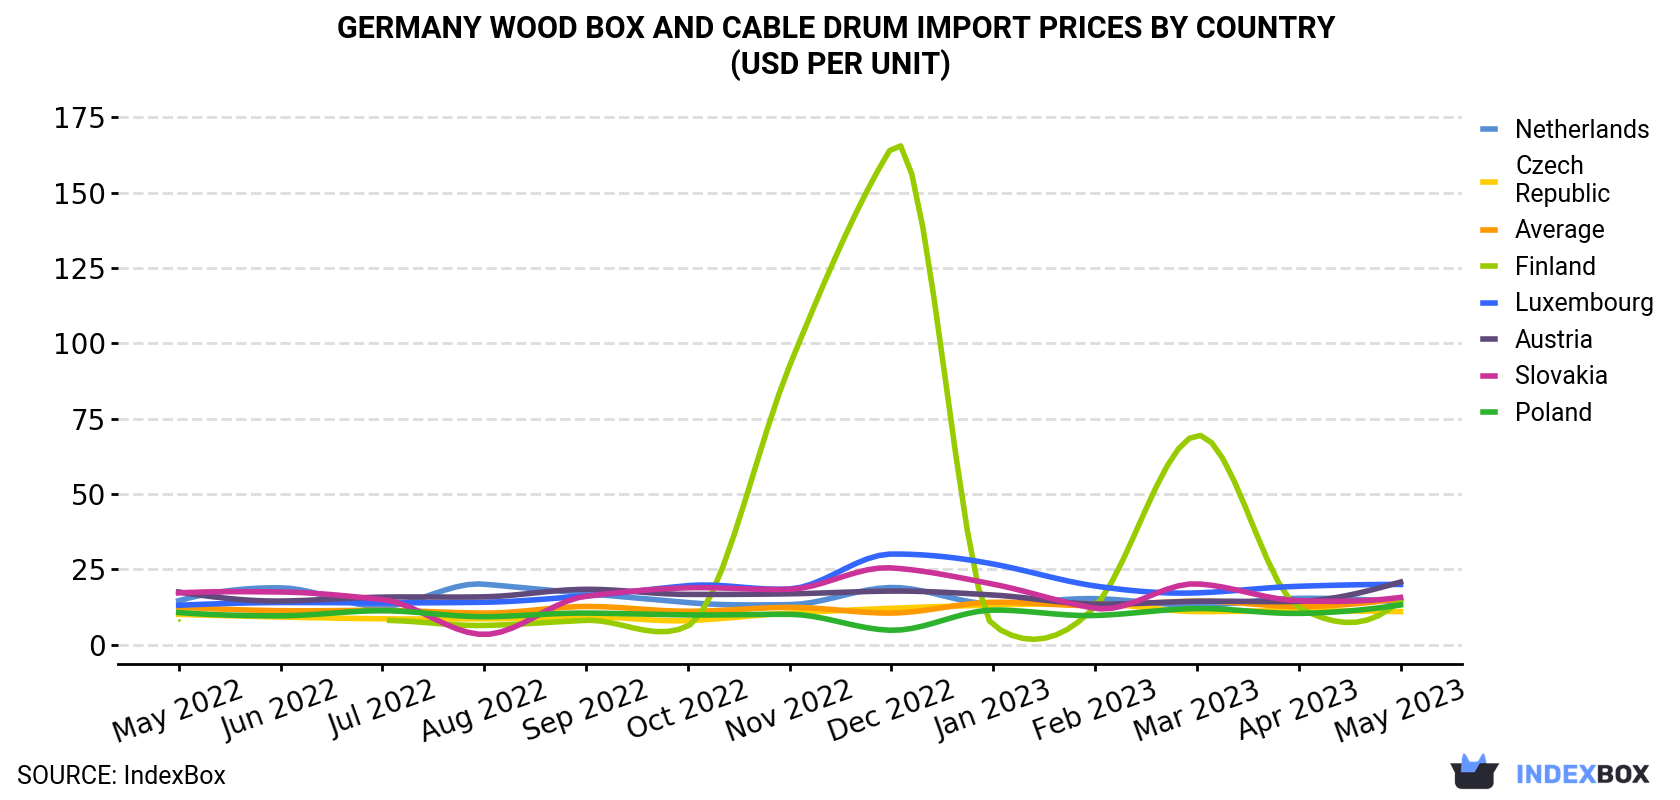 Germany Wood Box and Cable Drum Import Prices By Country (USD Per Unit)